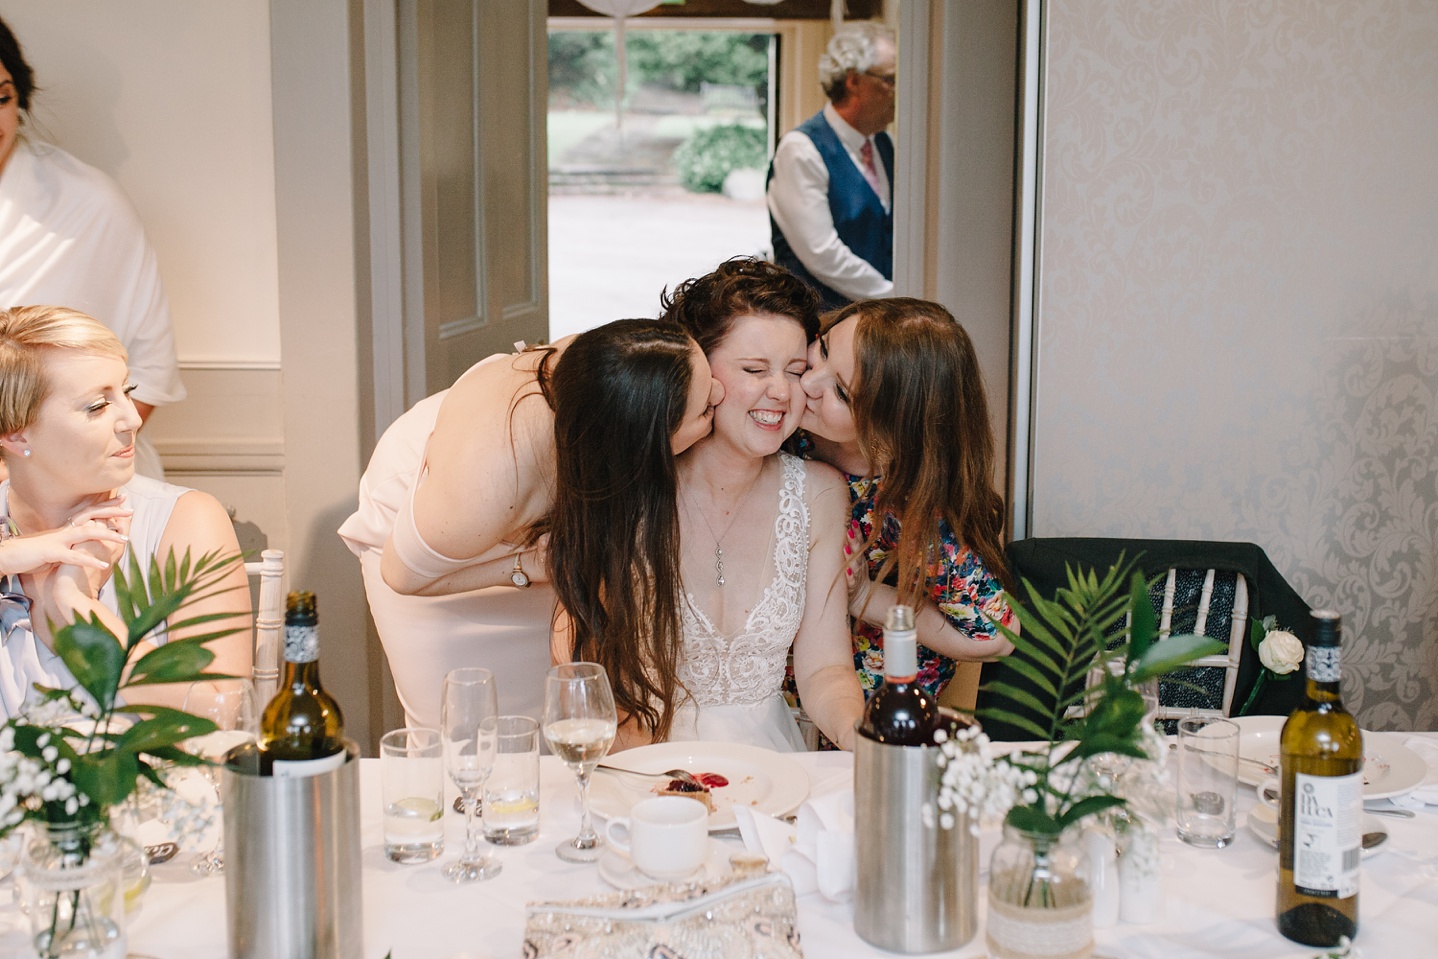 brides friends kissing bride on the cheek during speeches at Whirlowbrook Hall wedding